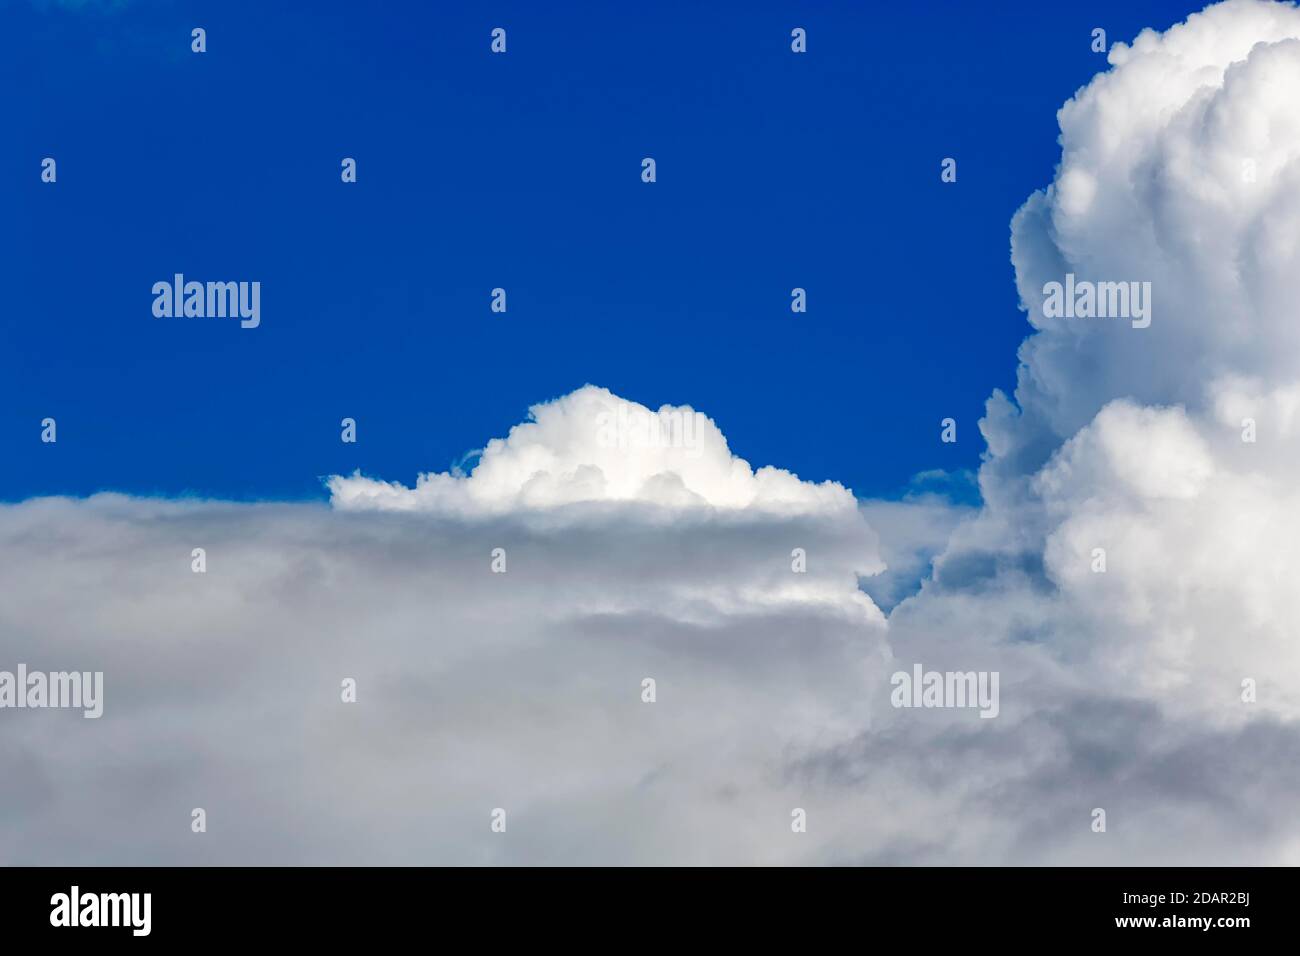 Cloud formation, stratus clouds and cumulus clouds, cumulus clouds in front of a blue sky, background image, North Rhine-Westphalia, Germany Stock Photo